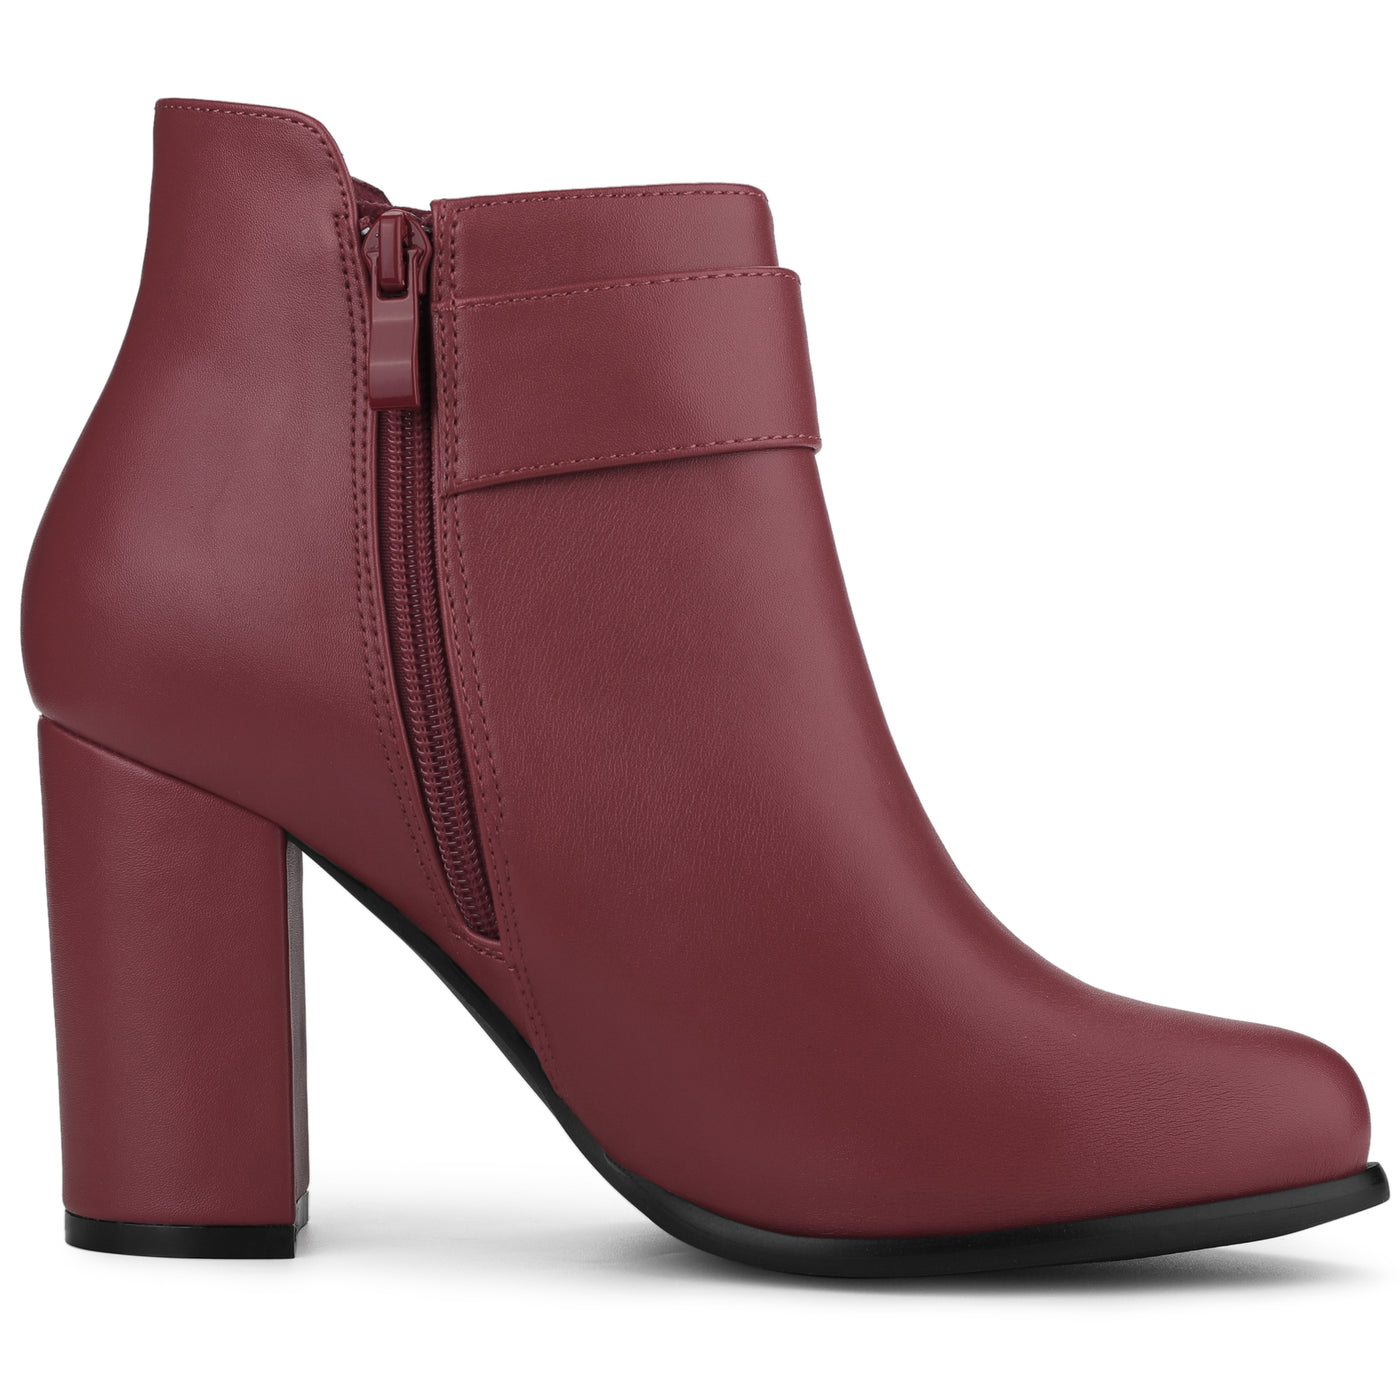 Allegra K Round Toe Circle Buckle Chunky Heel Ankle Boots